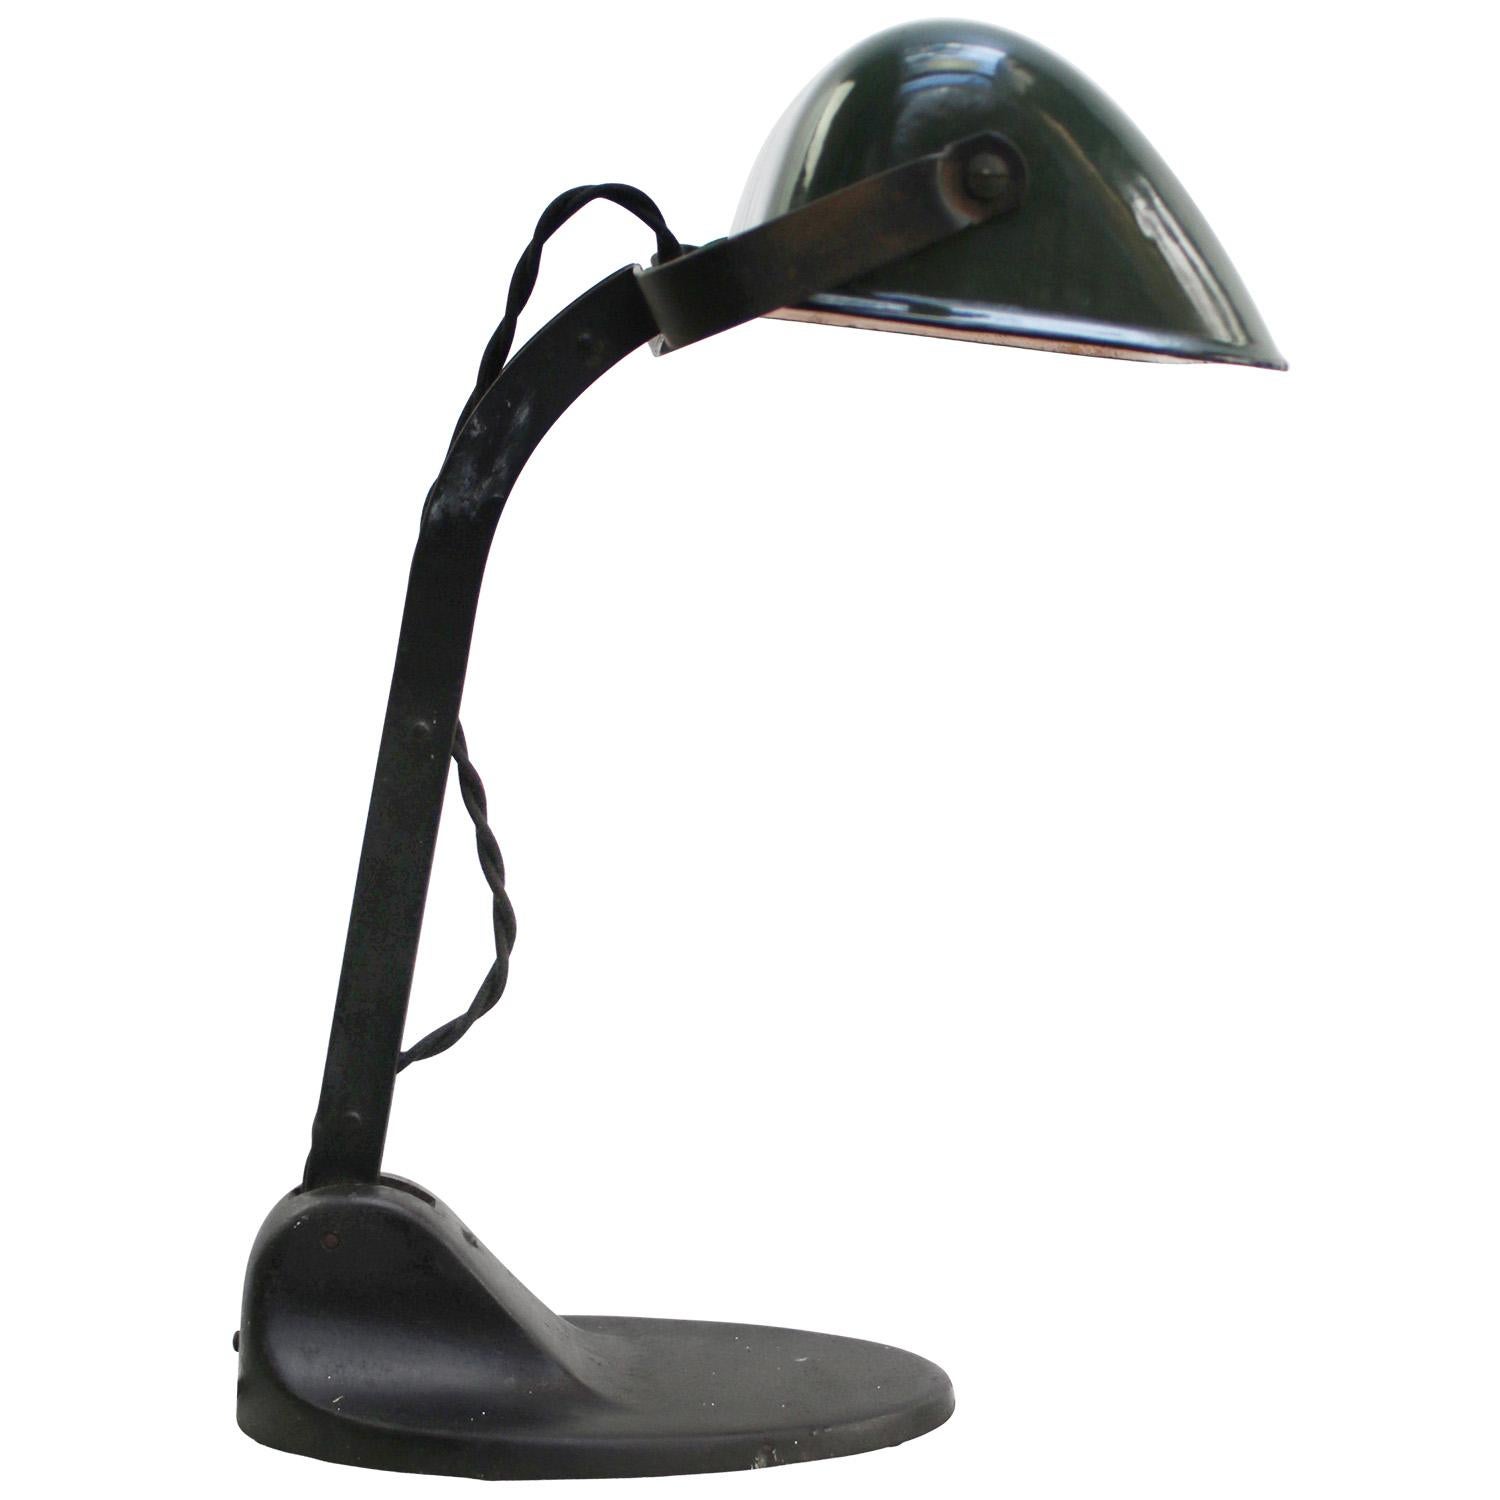 Green Enamel German Bauhaus Bankers lamp model 2268 by Jacobus, 1920/30s
2,5 meter black cotton flex, plug and switch

Also available with US/UK plug

Weight: 2.10 kg / 4.6 lb

Priced per individual item. All lamps have been made suitable by